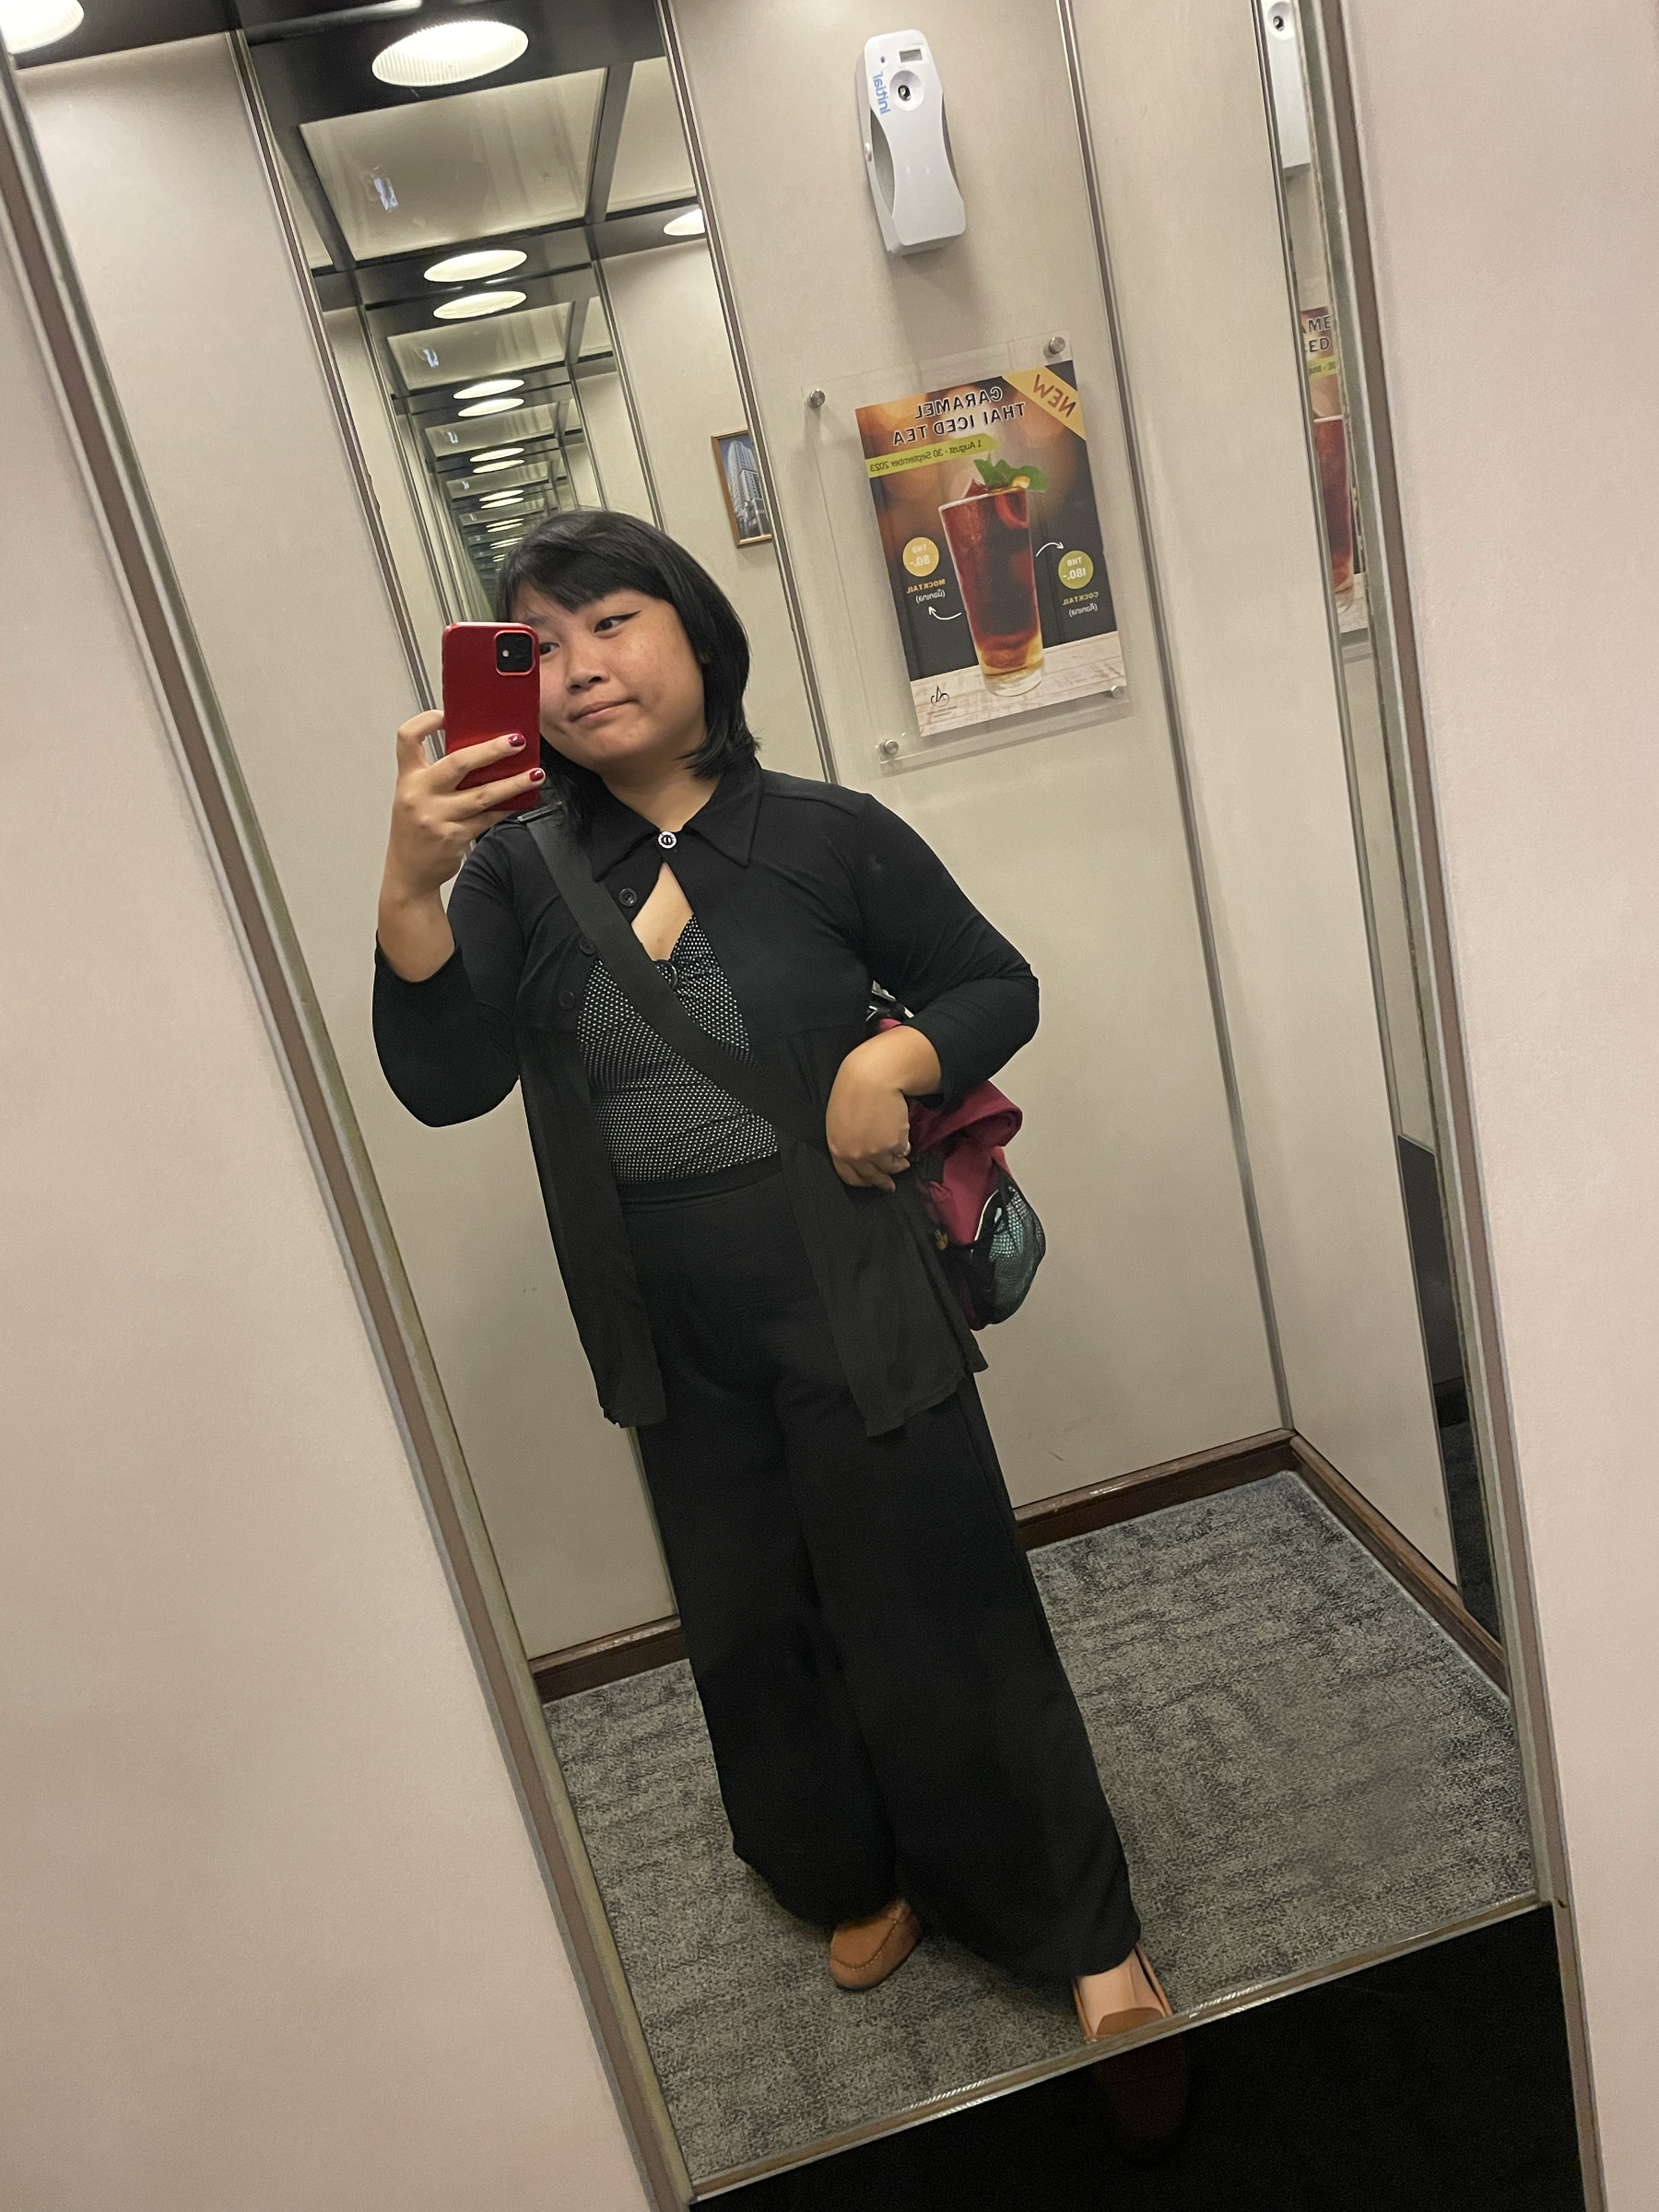 Chi’s outfit for the day shown in a mirror selfie: white polka-dot on black v-neck fitted top with a sheer black long sleeved collared coverup, and long black flared pants.